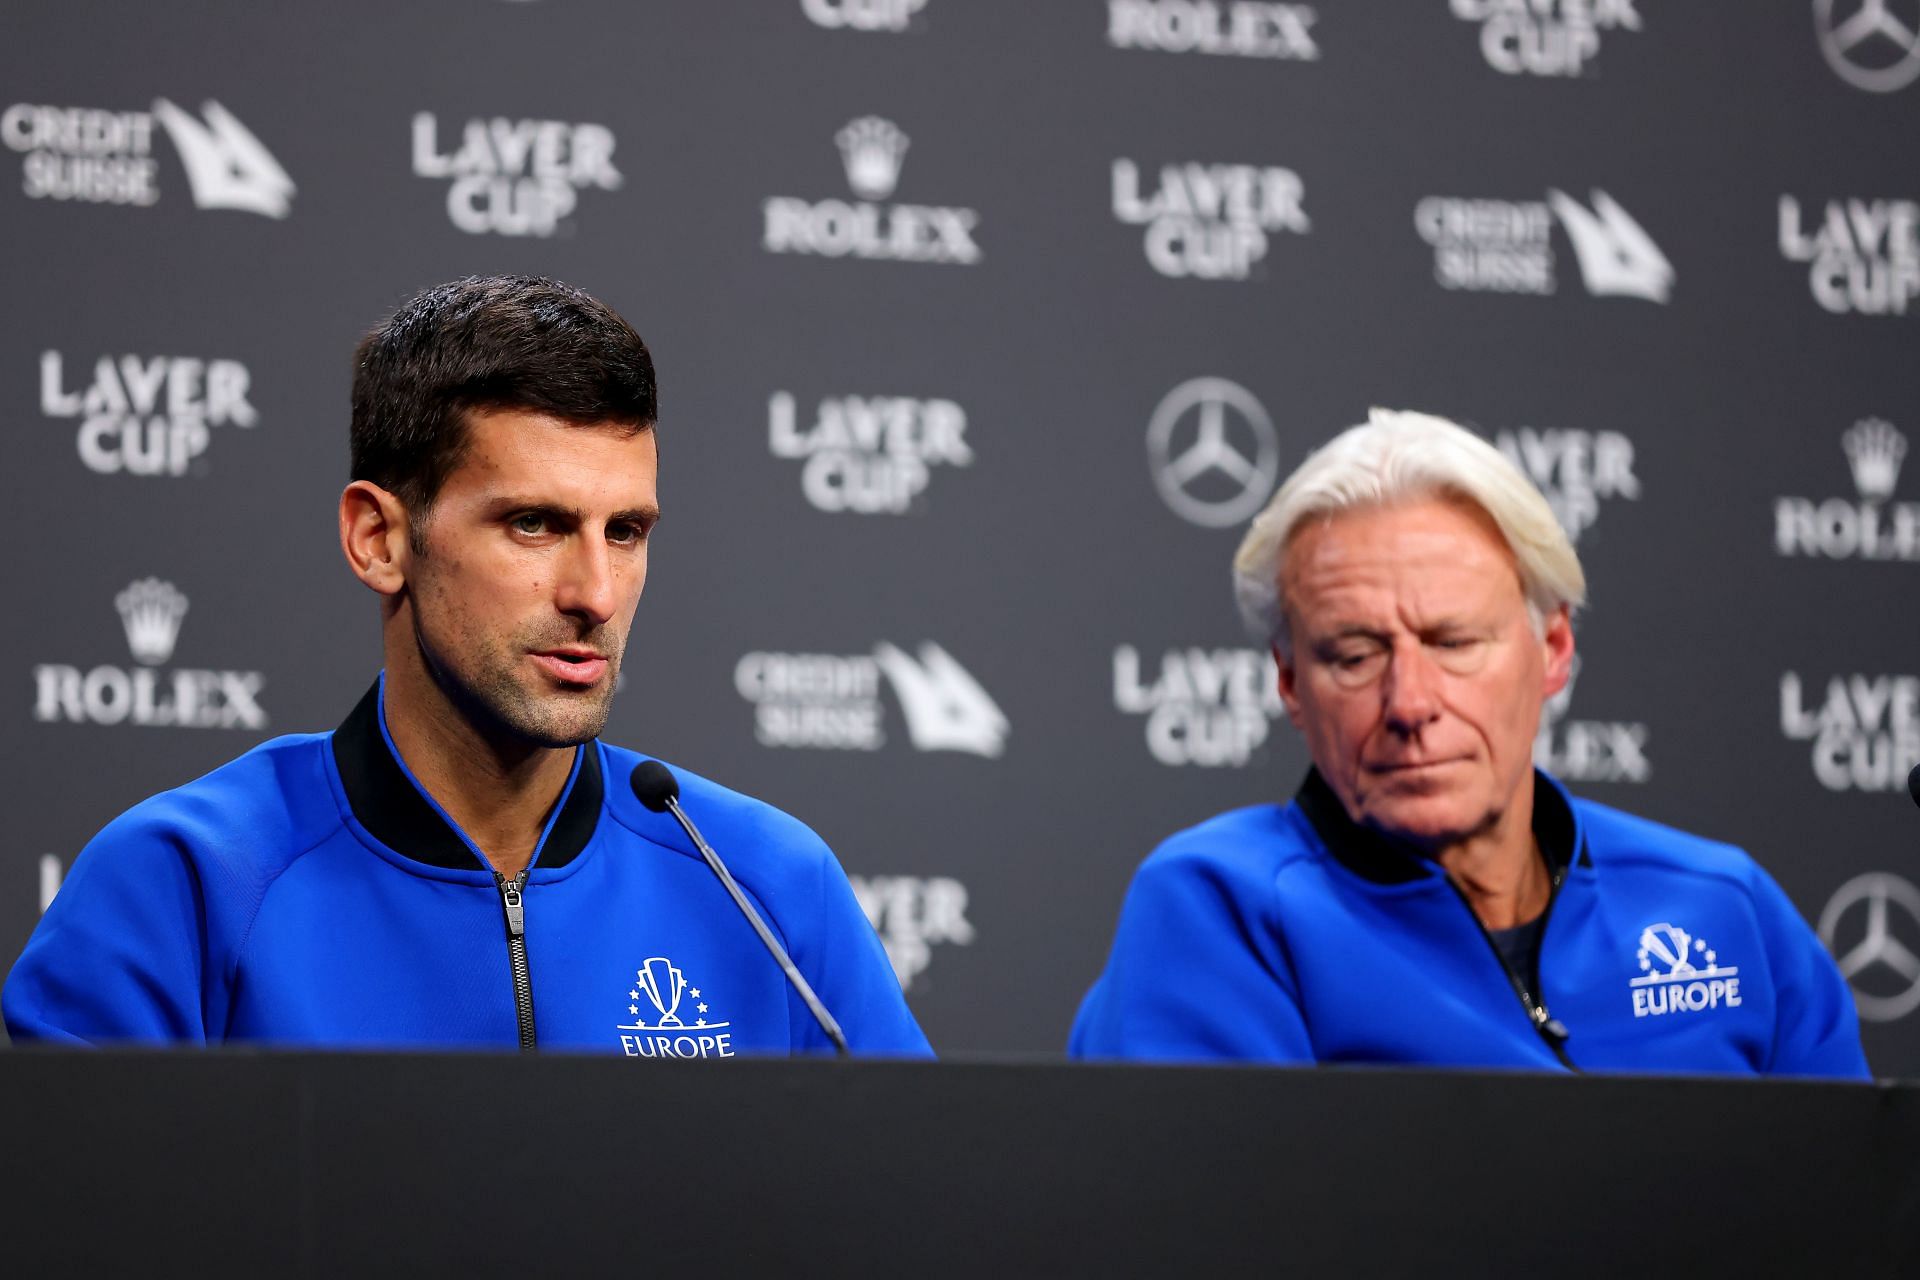 Bjorn Borg during a press conference at the 2022 Laver Cup 